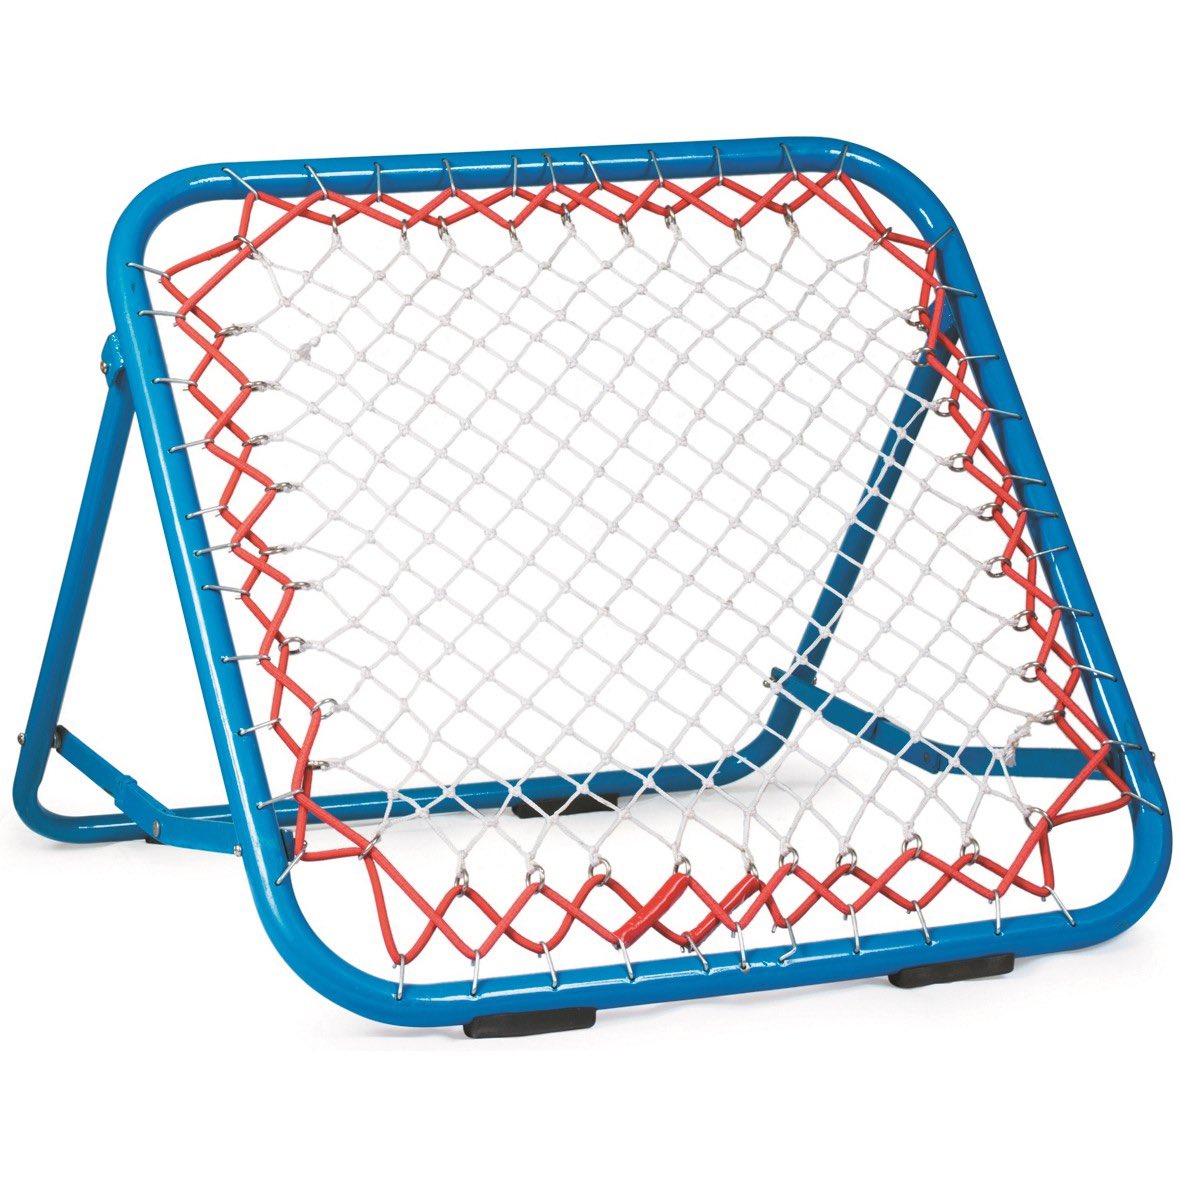 This is a cracking bit of kit. Aside from the sport of Tchoukball, who has some other great activity ideas using the net/frame?

Ideally some that can be led by children during playtimes 🙌 🤾‍♂️